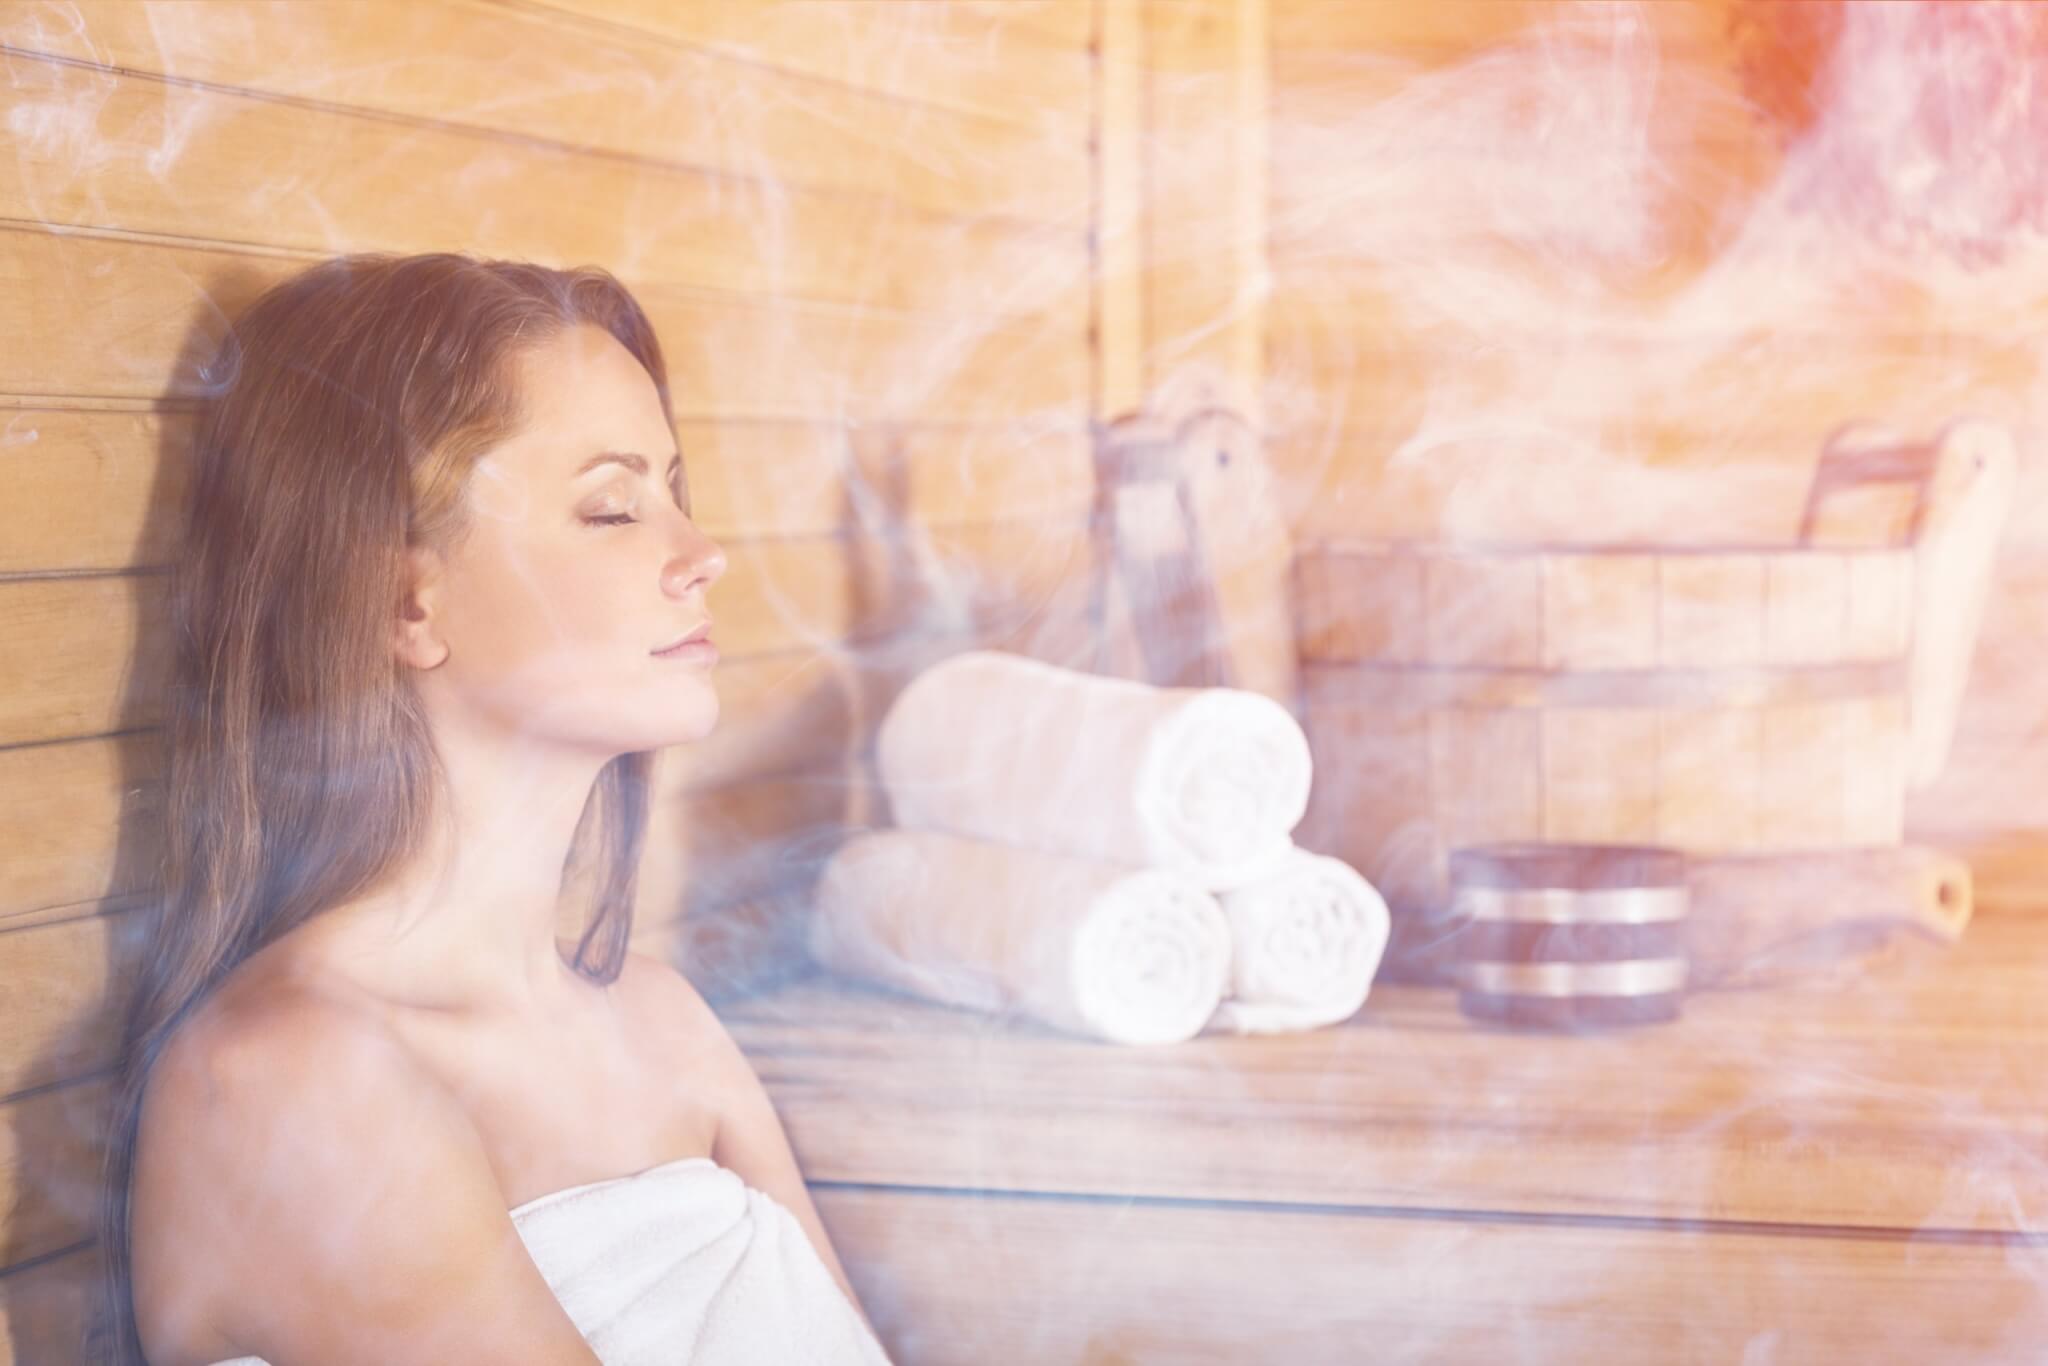 A woman enjoying a sauna - one of many forms of moist heat therapy.